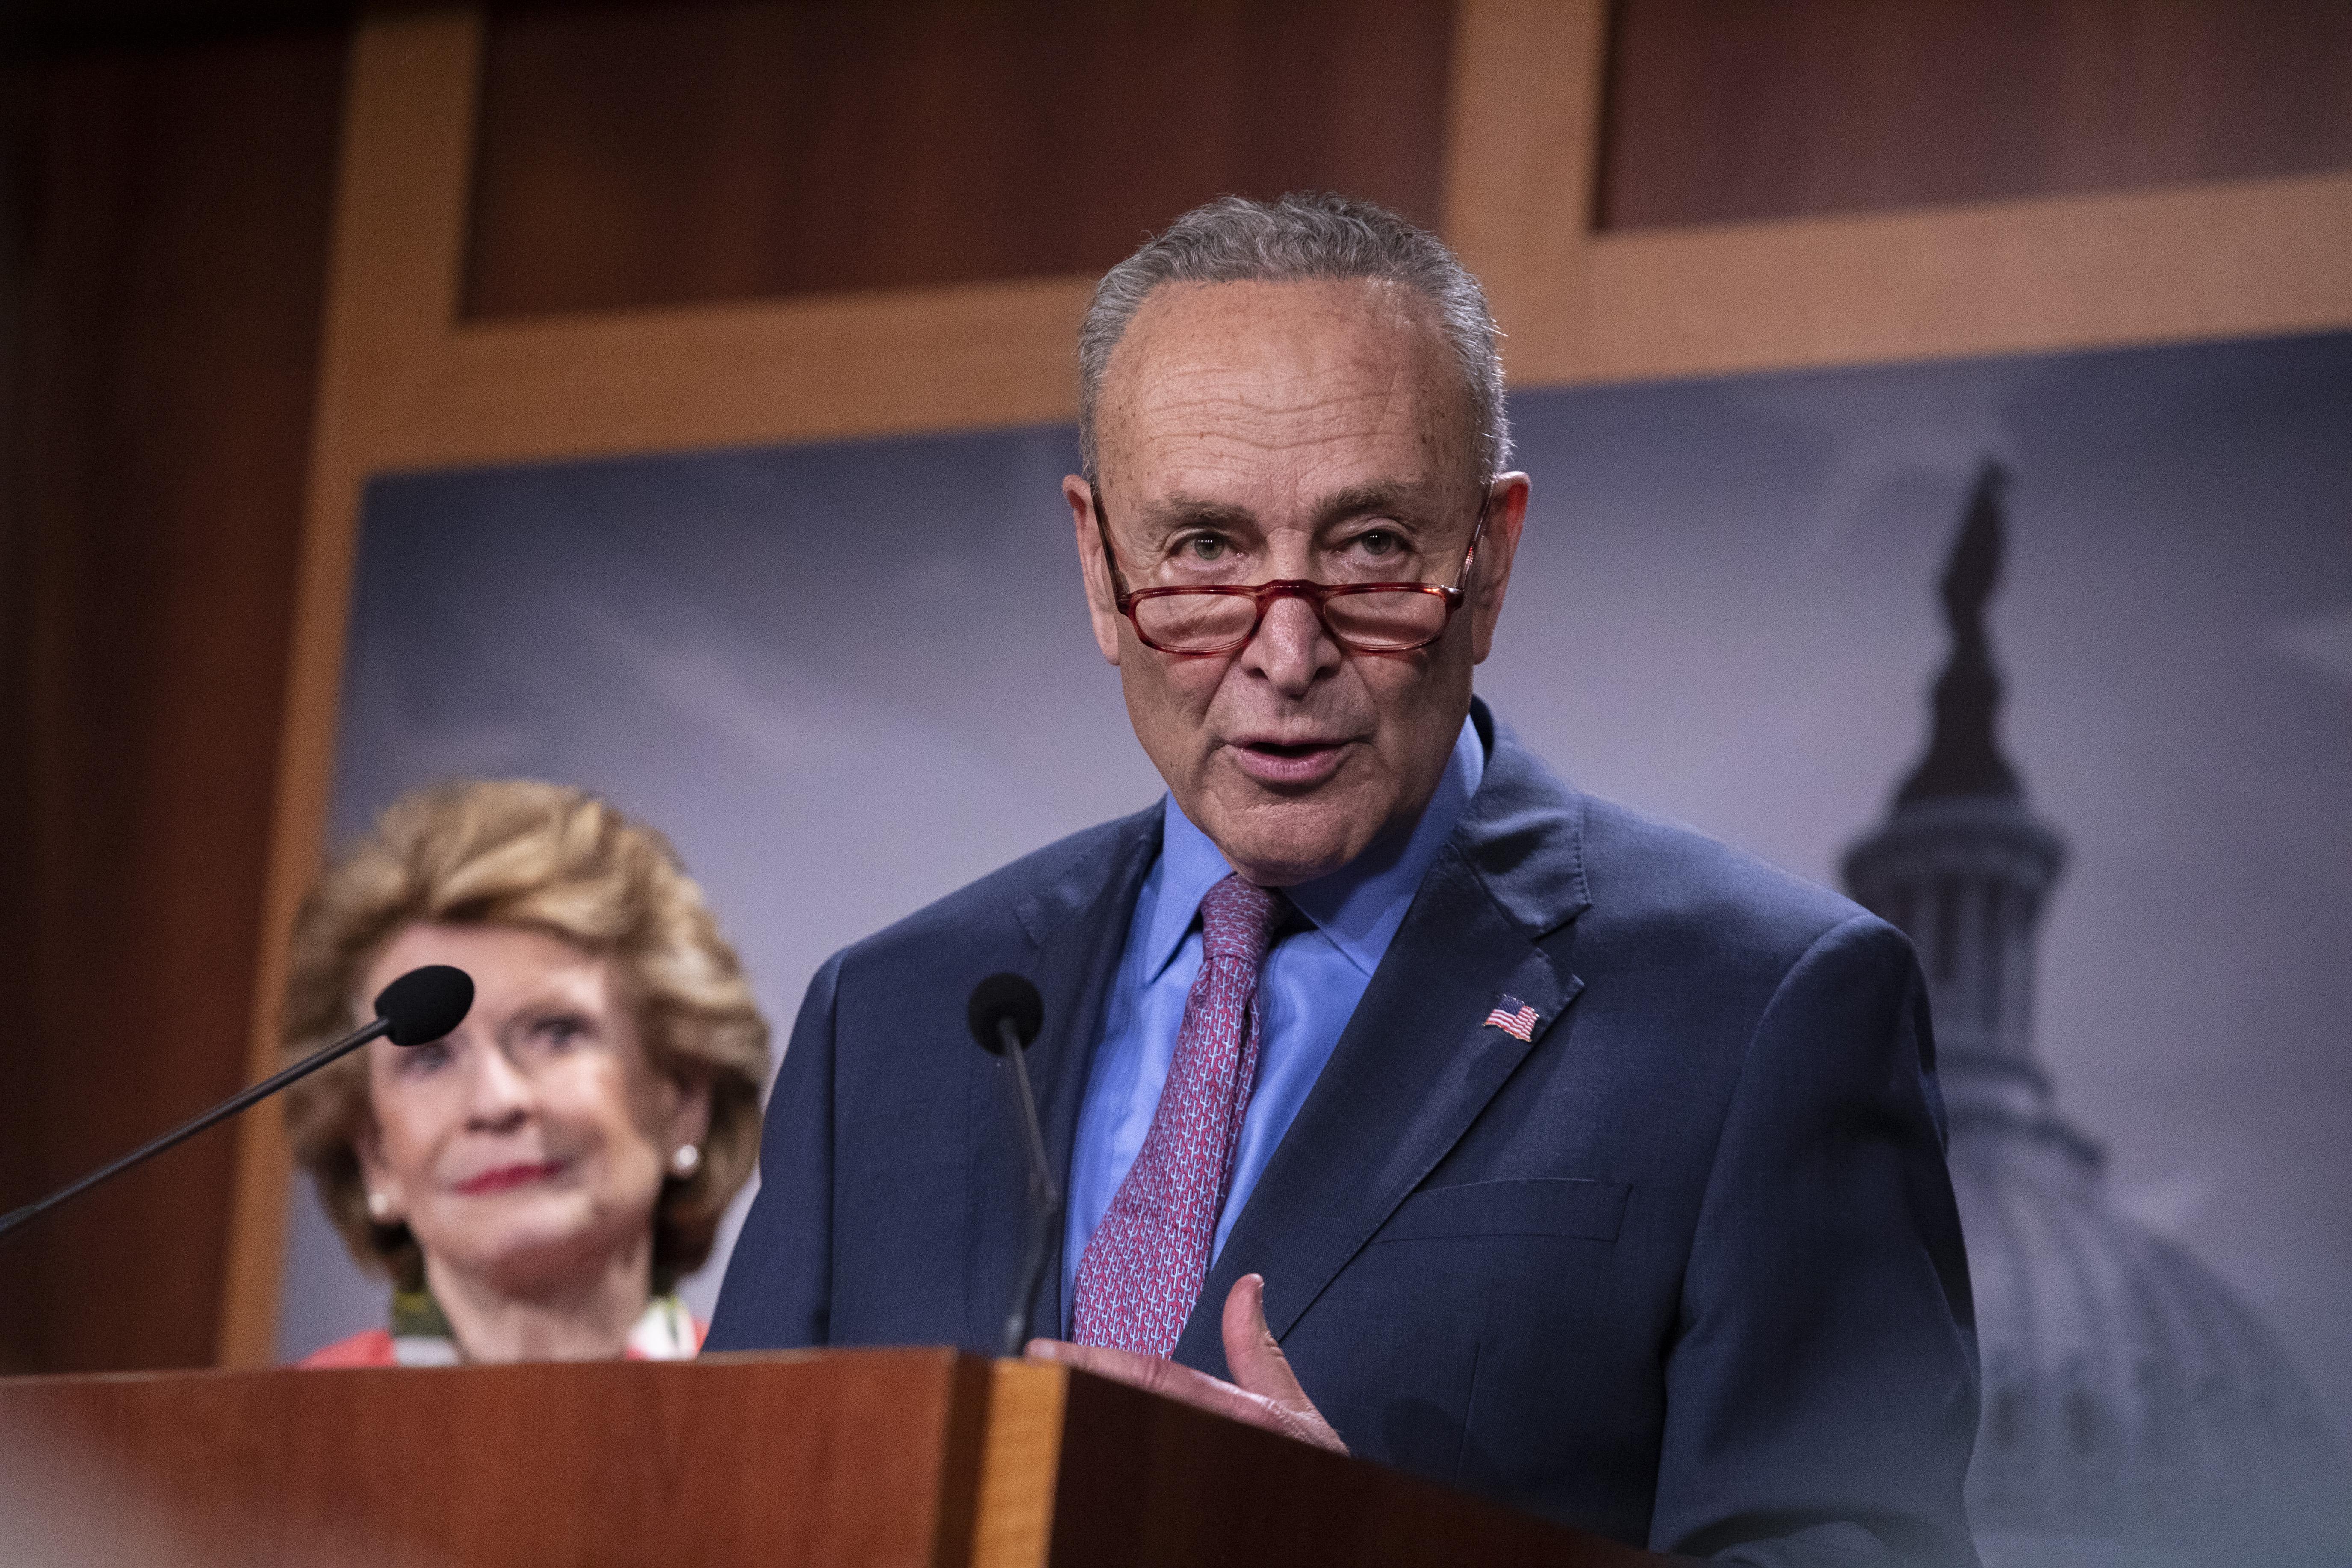 Chuck Schumer speaks at a lectern as Debbie Stabenow stands behind him.